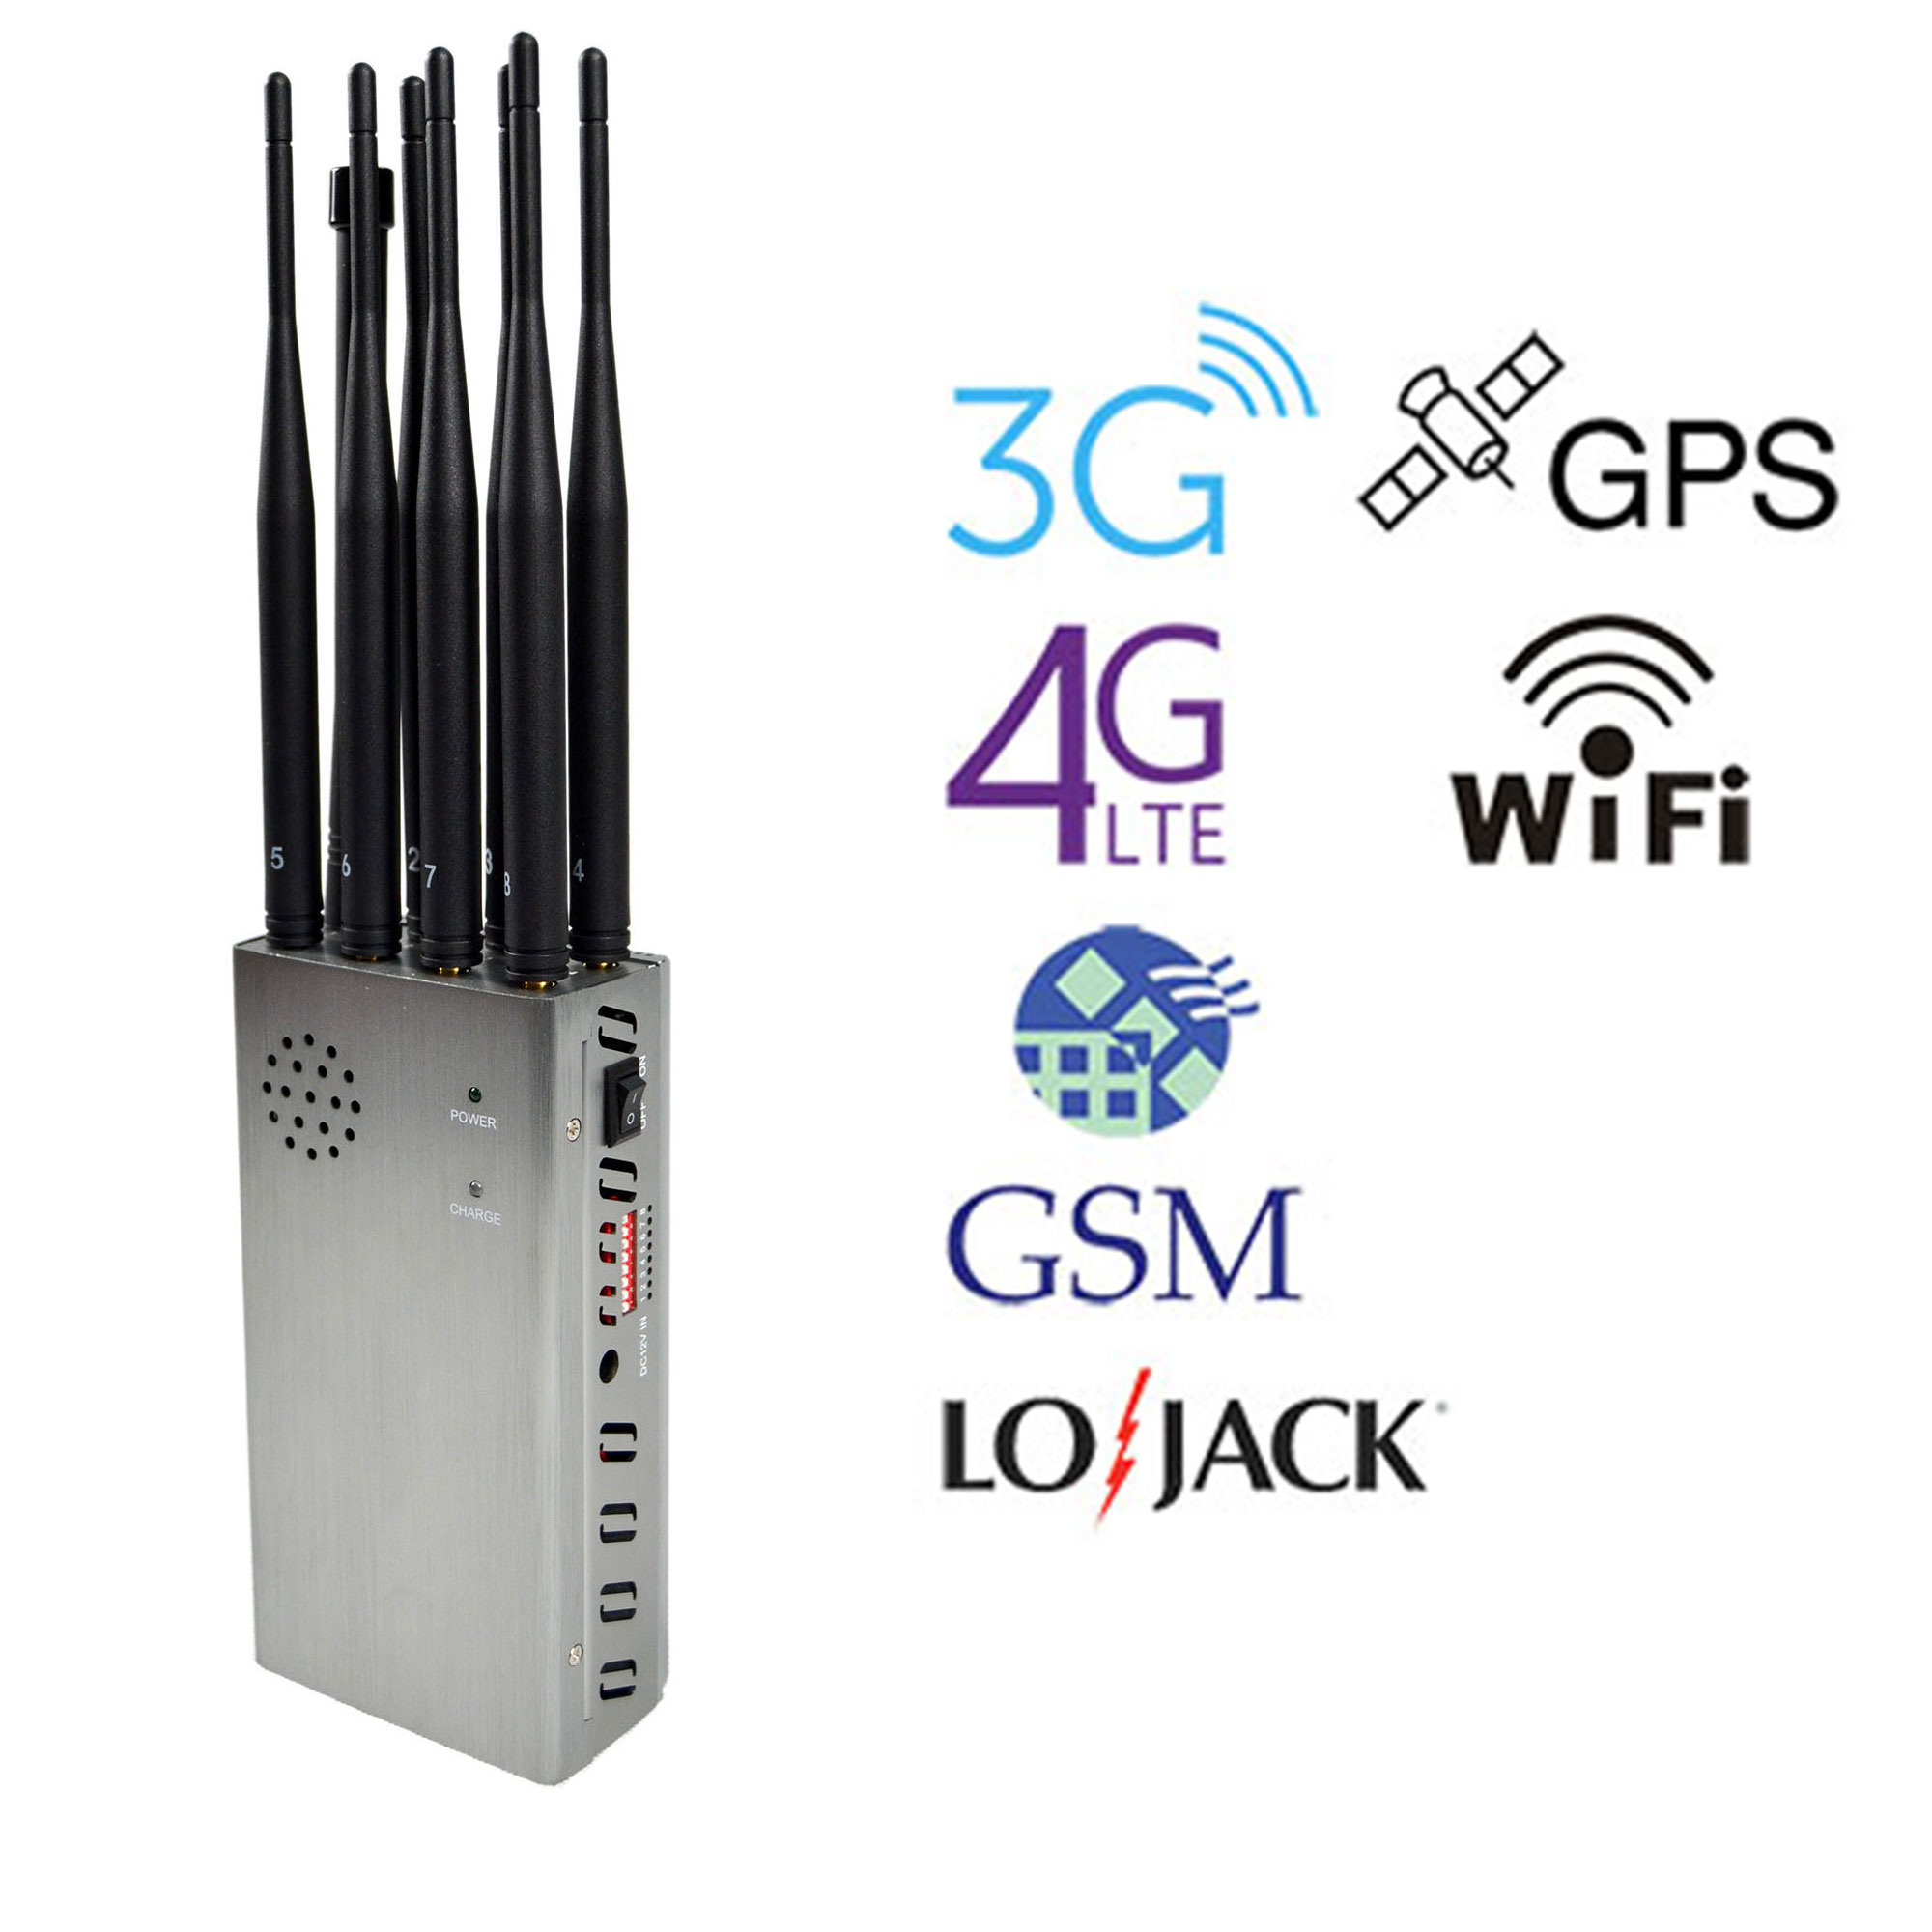 jammer network extra jobs - Portable 8 Antennas Cell Phone Jammers With 2g 3G 4G And LOJACK GPS WIFI Signals